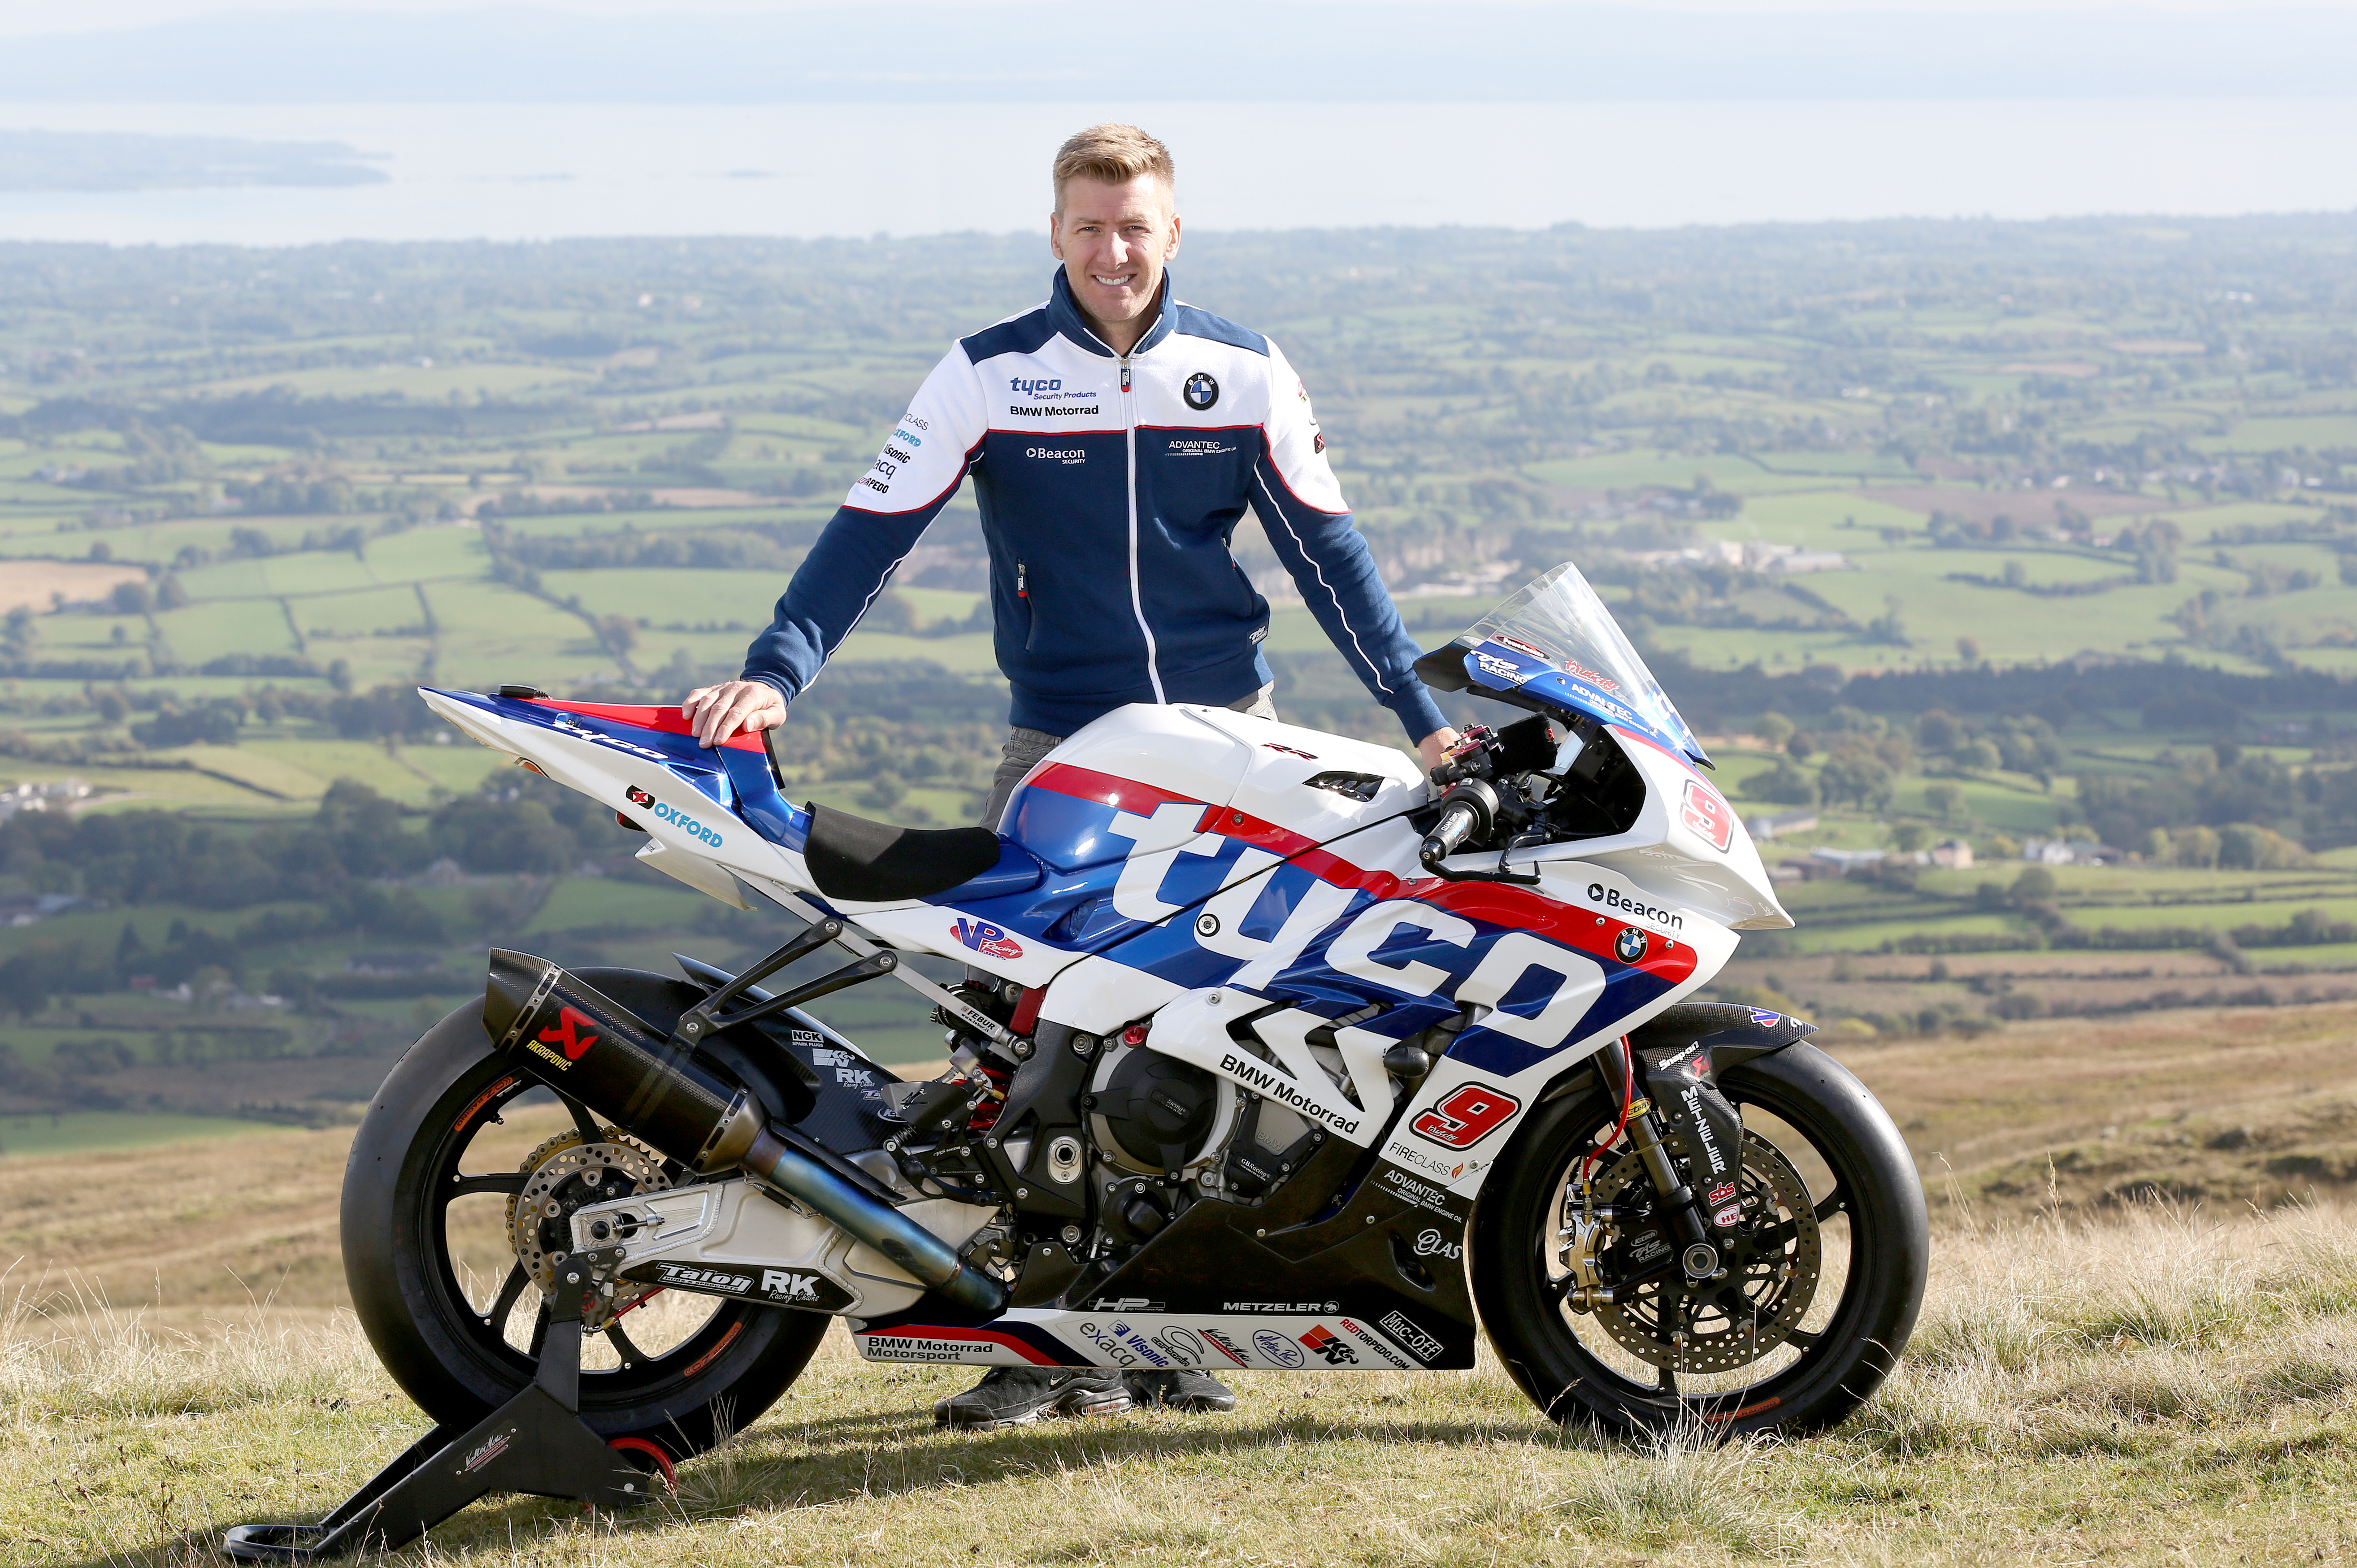 IAN HUTCHINSON TO RACE FOR TYCO BMW IN 2016 00264